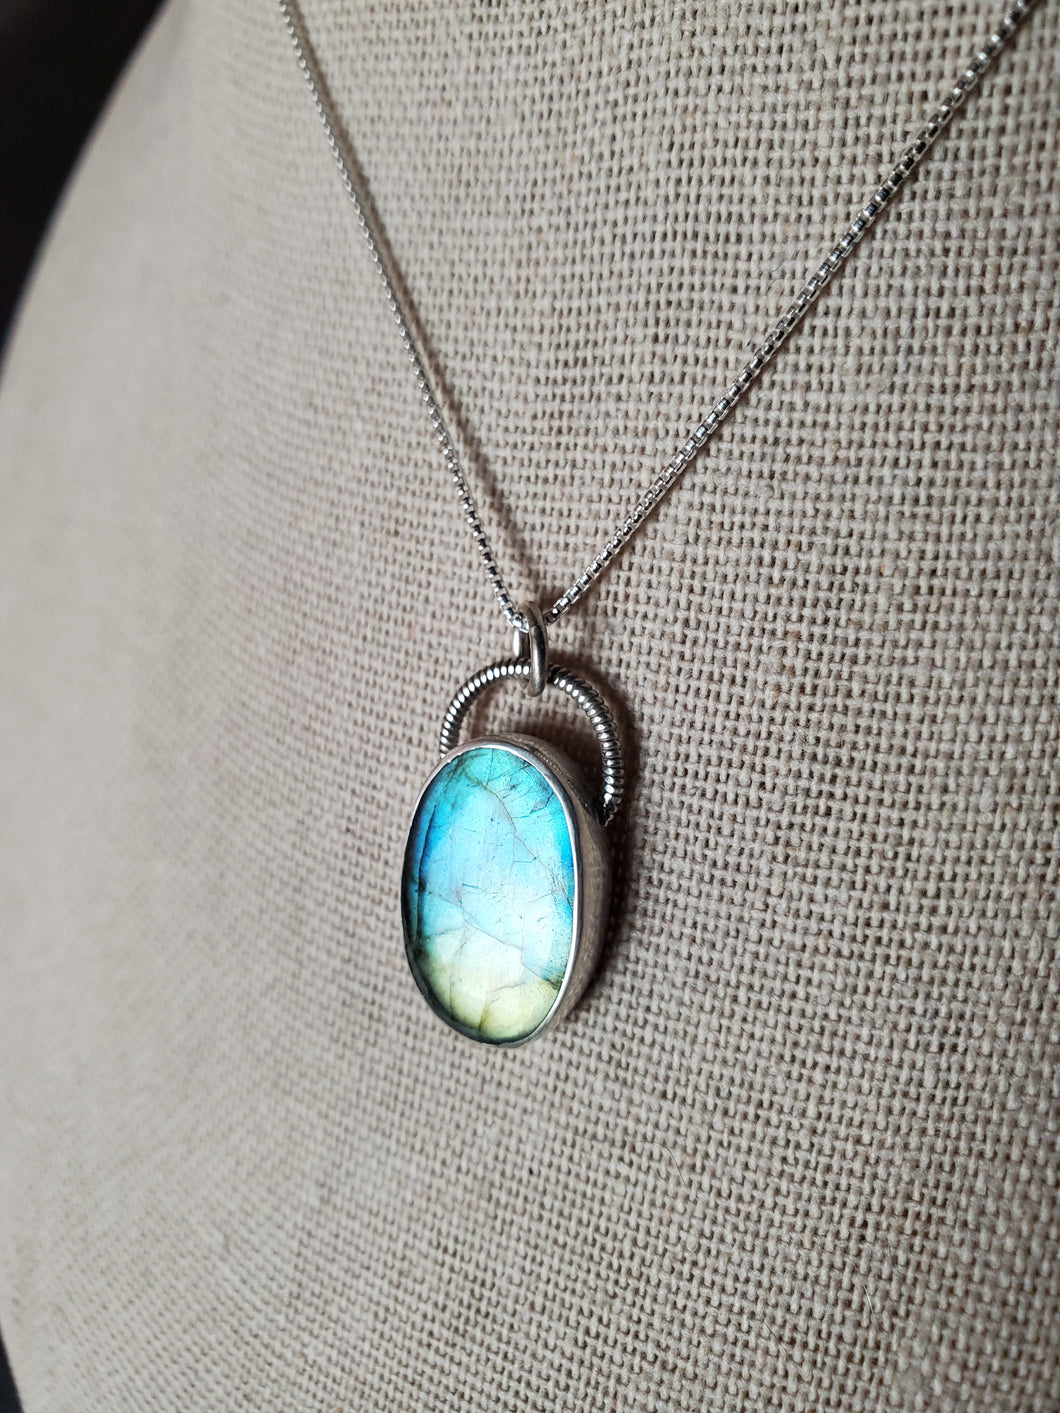 Phish - Fast Enough For You with labradorite